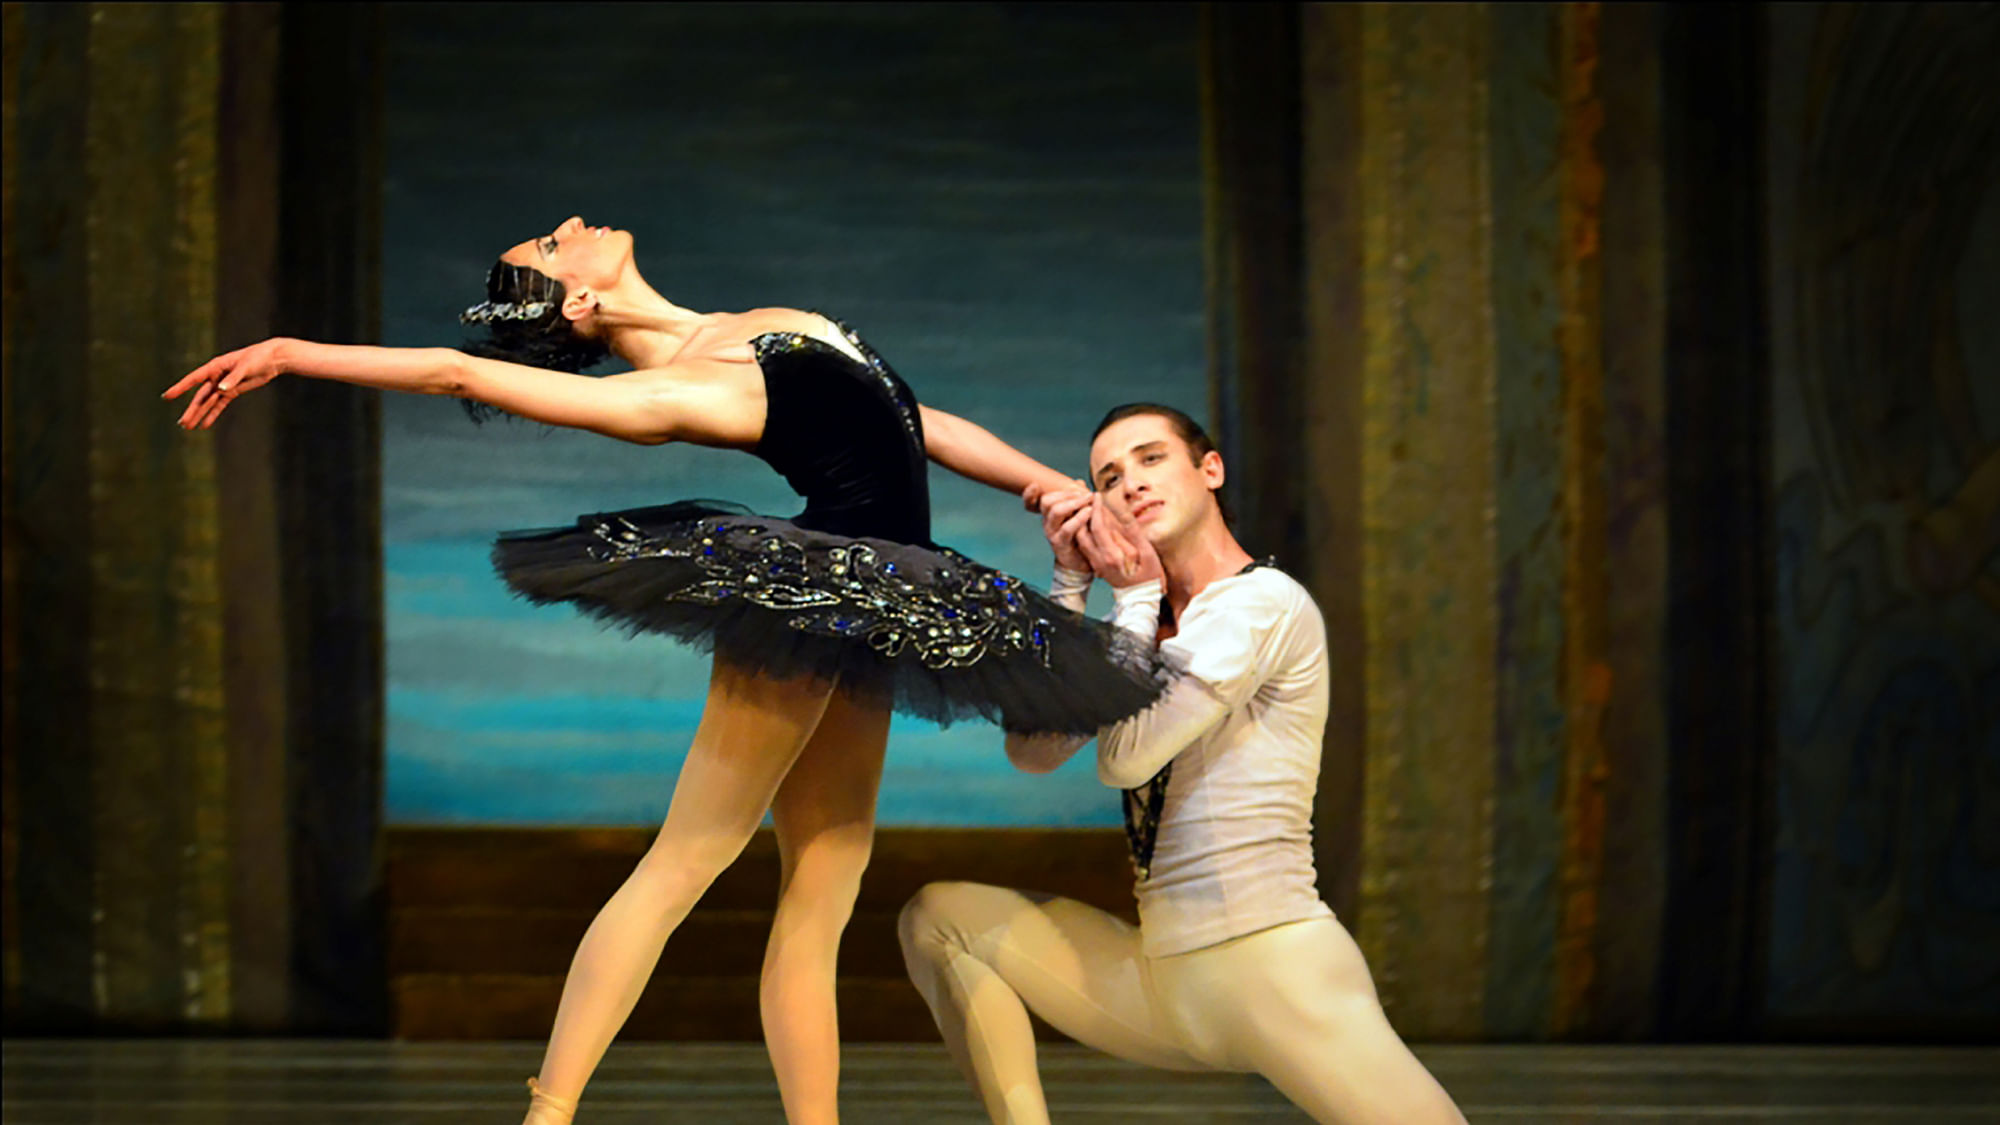 140 years after it was first performed by the Bolshoi Ballet group, ‘Swan Lake’ continues to hold universal appeal.